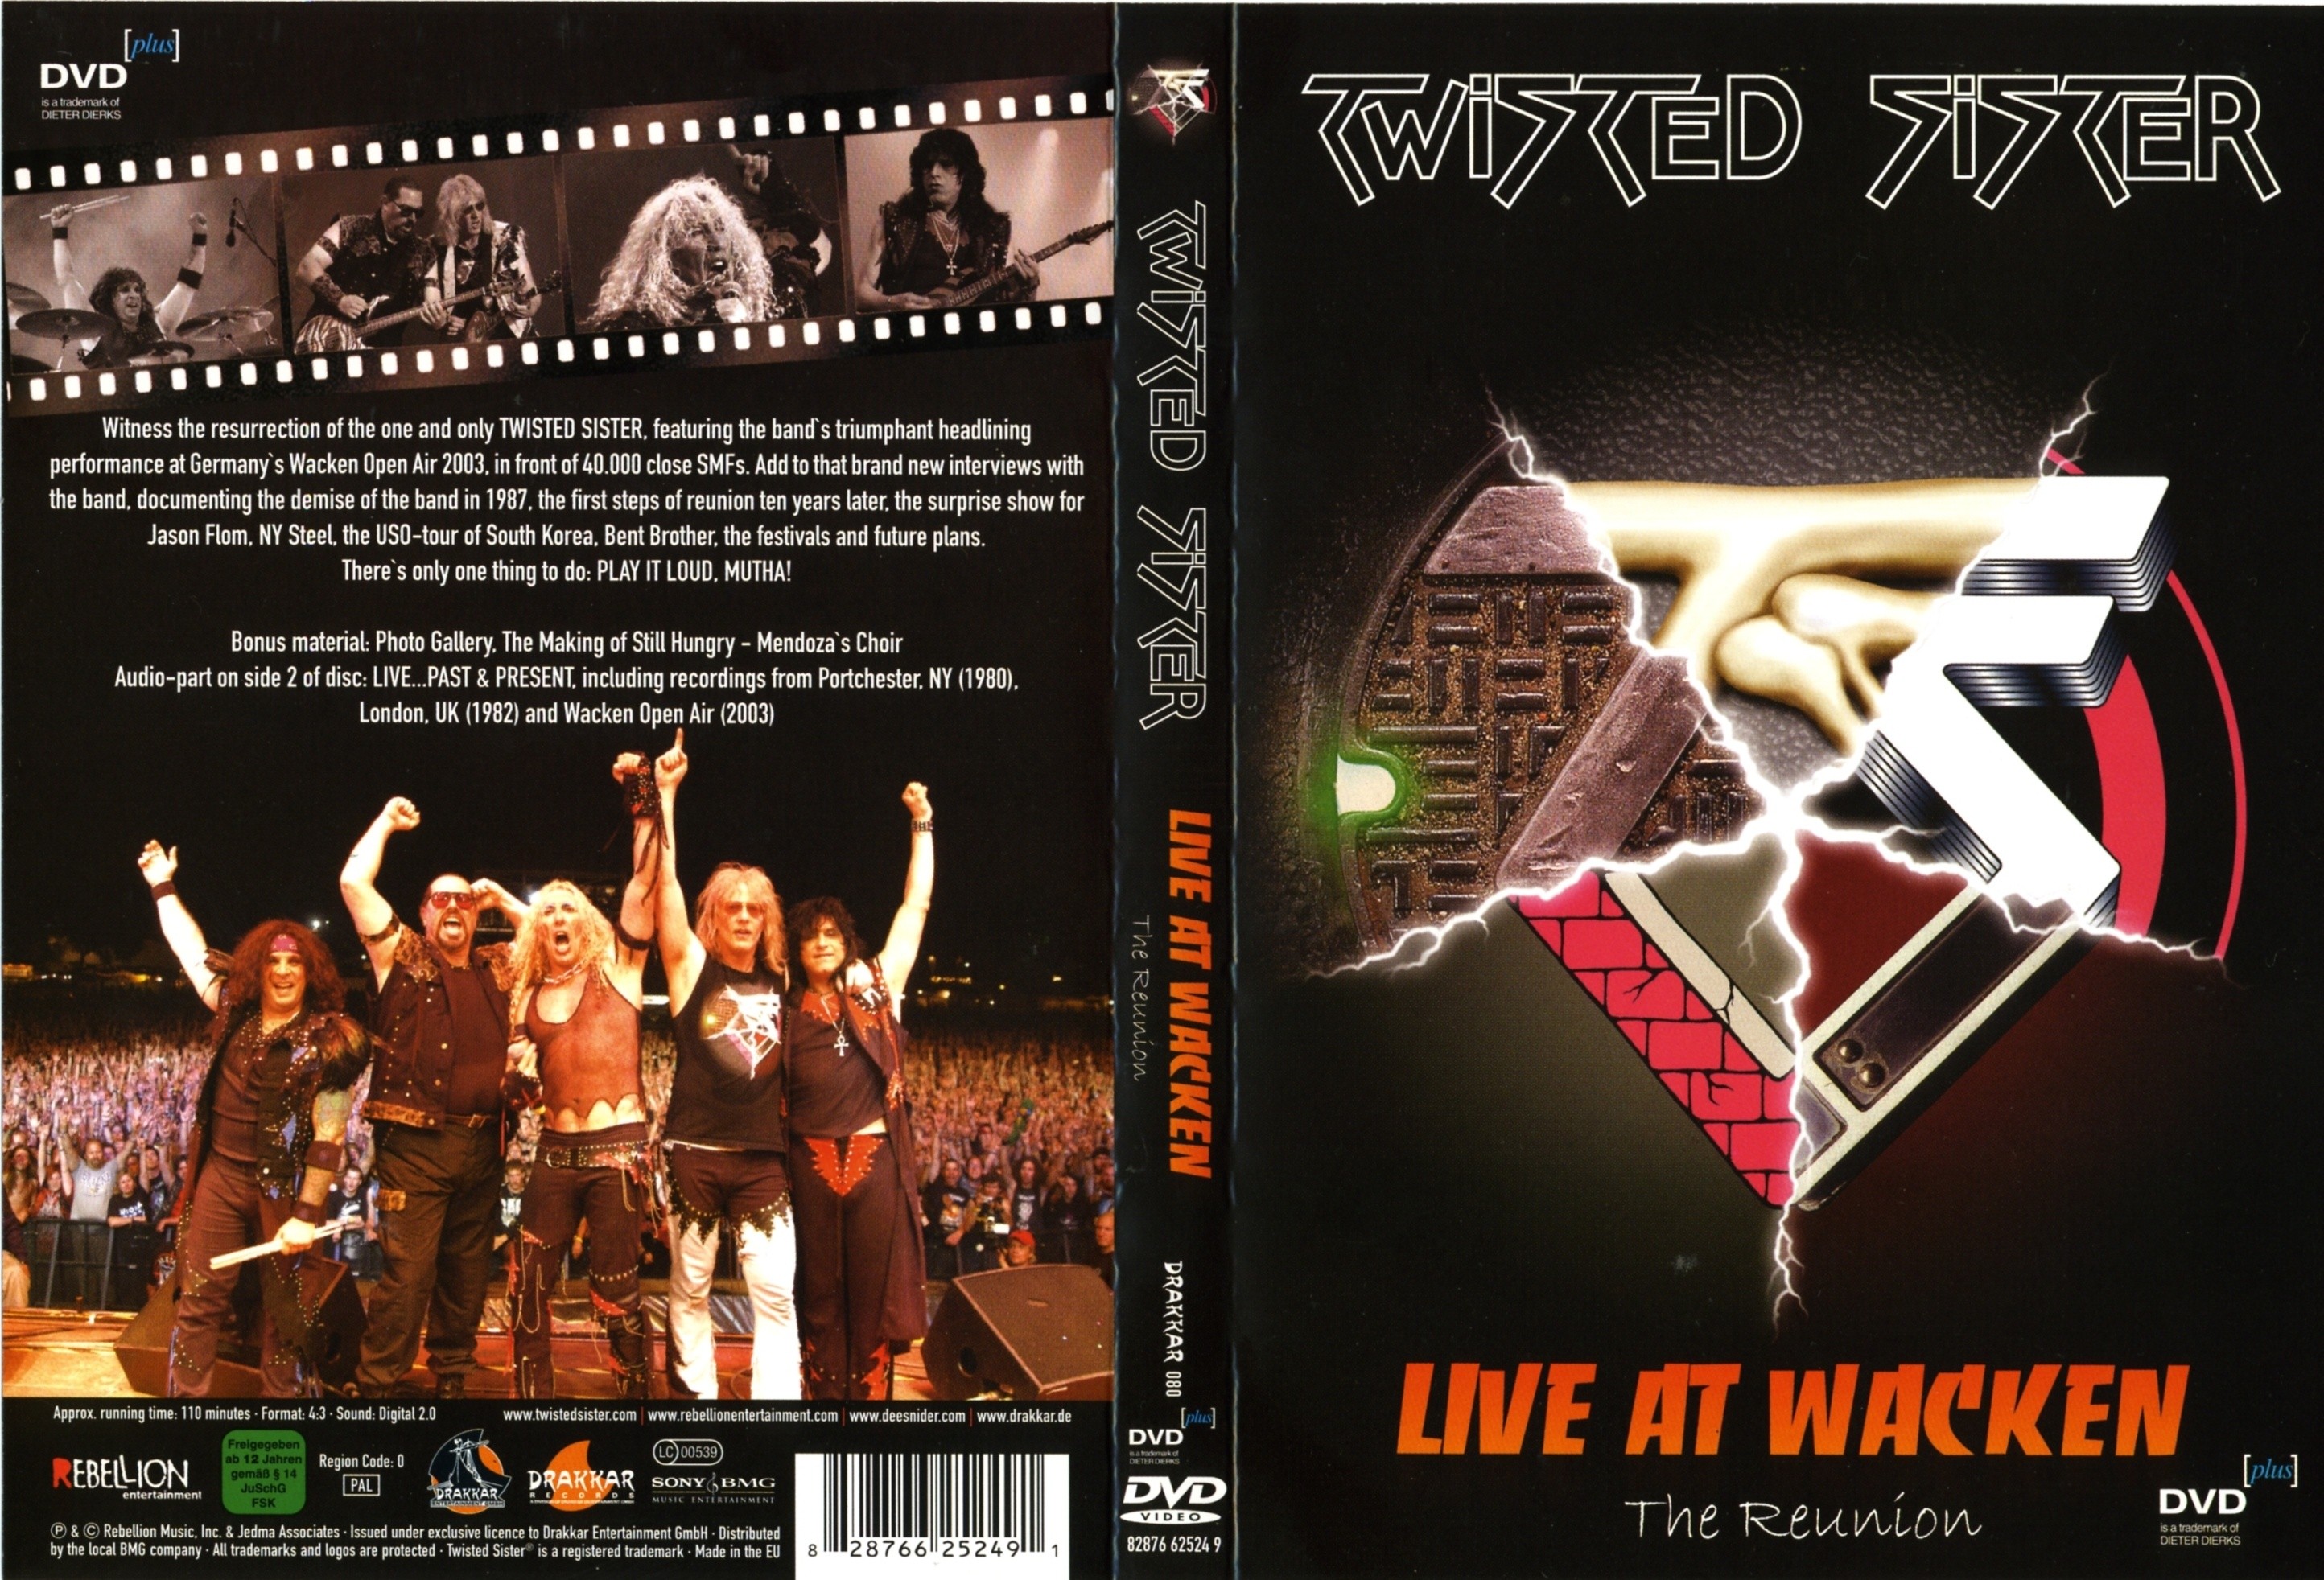 Jaquette DVD Twisted sister Live at Wacken